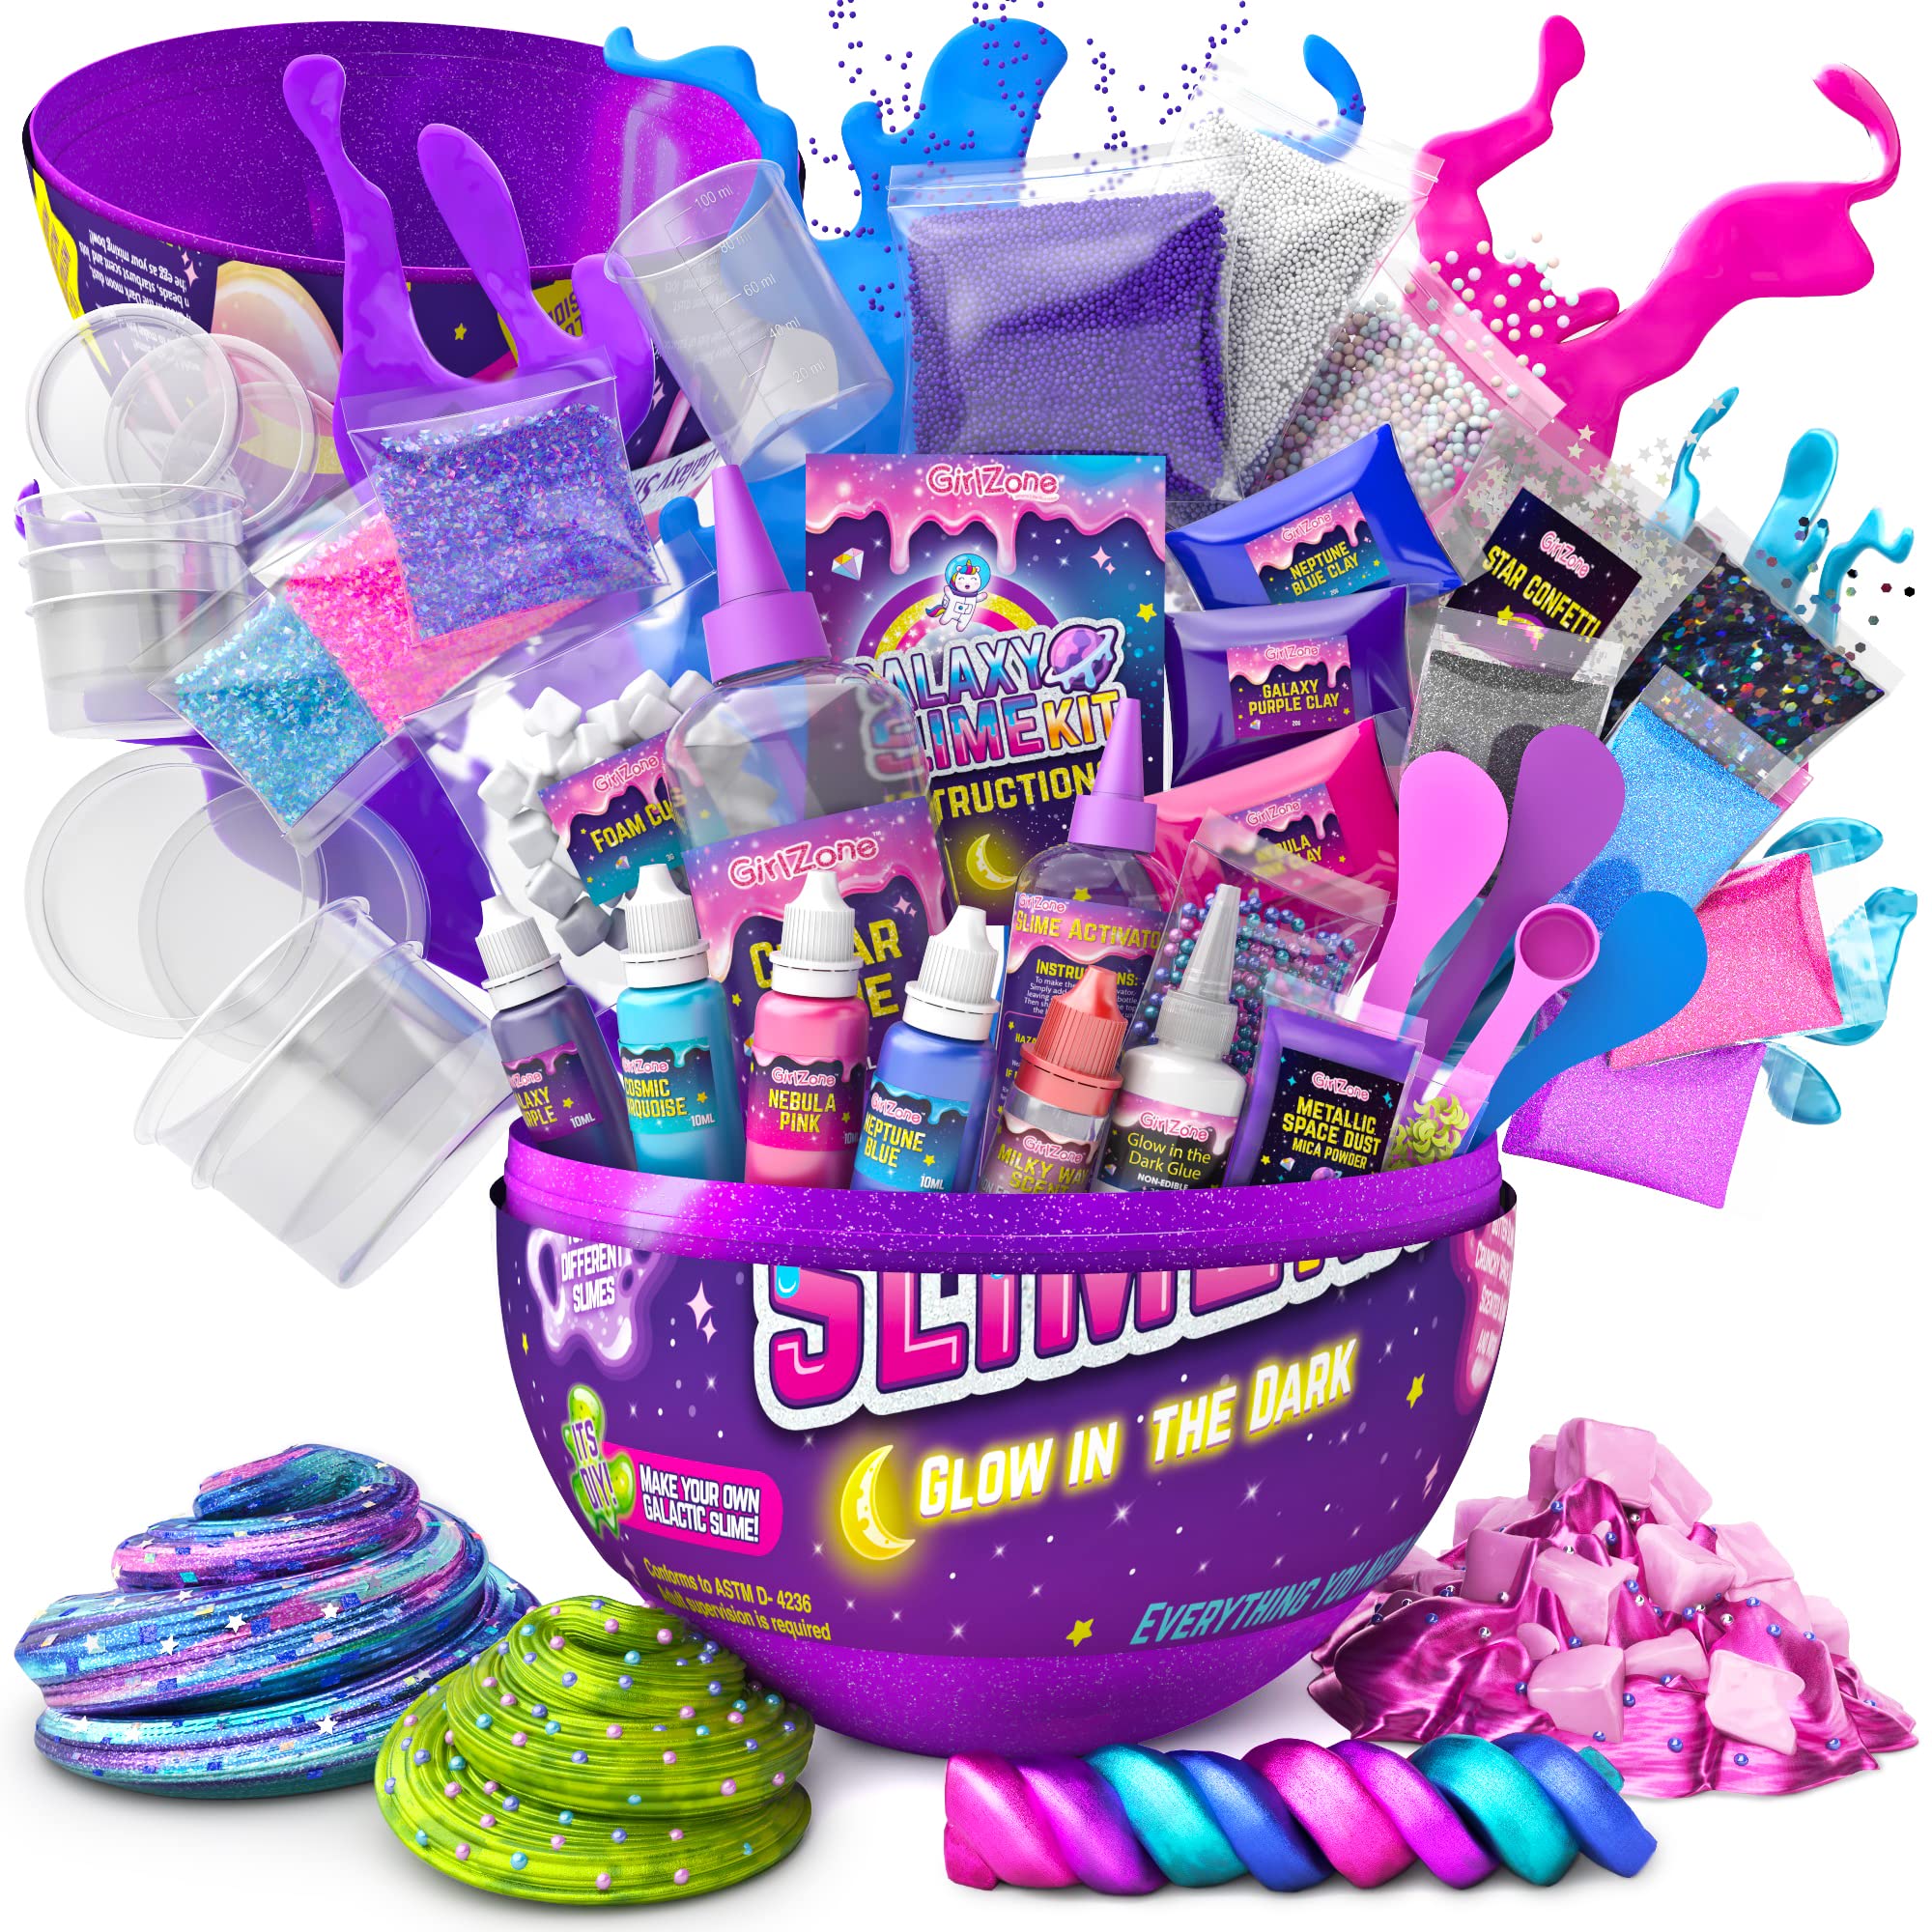 GirlZone girlZone Egg Surprise galaxy Slime Kit for girls, Measures 95  Inches High, 41 Pieces to Make DIY glow in The Dark Slime with Lot